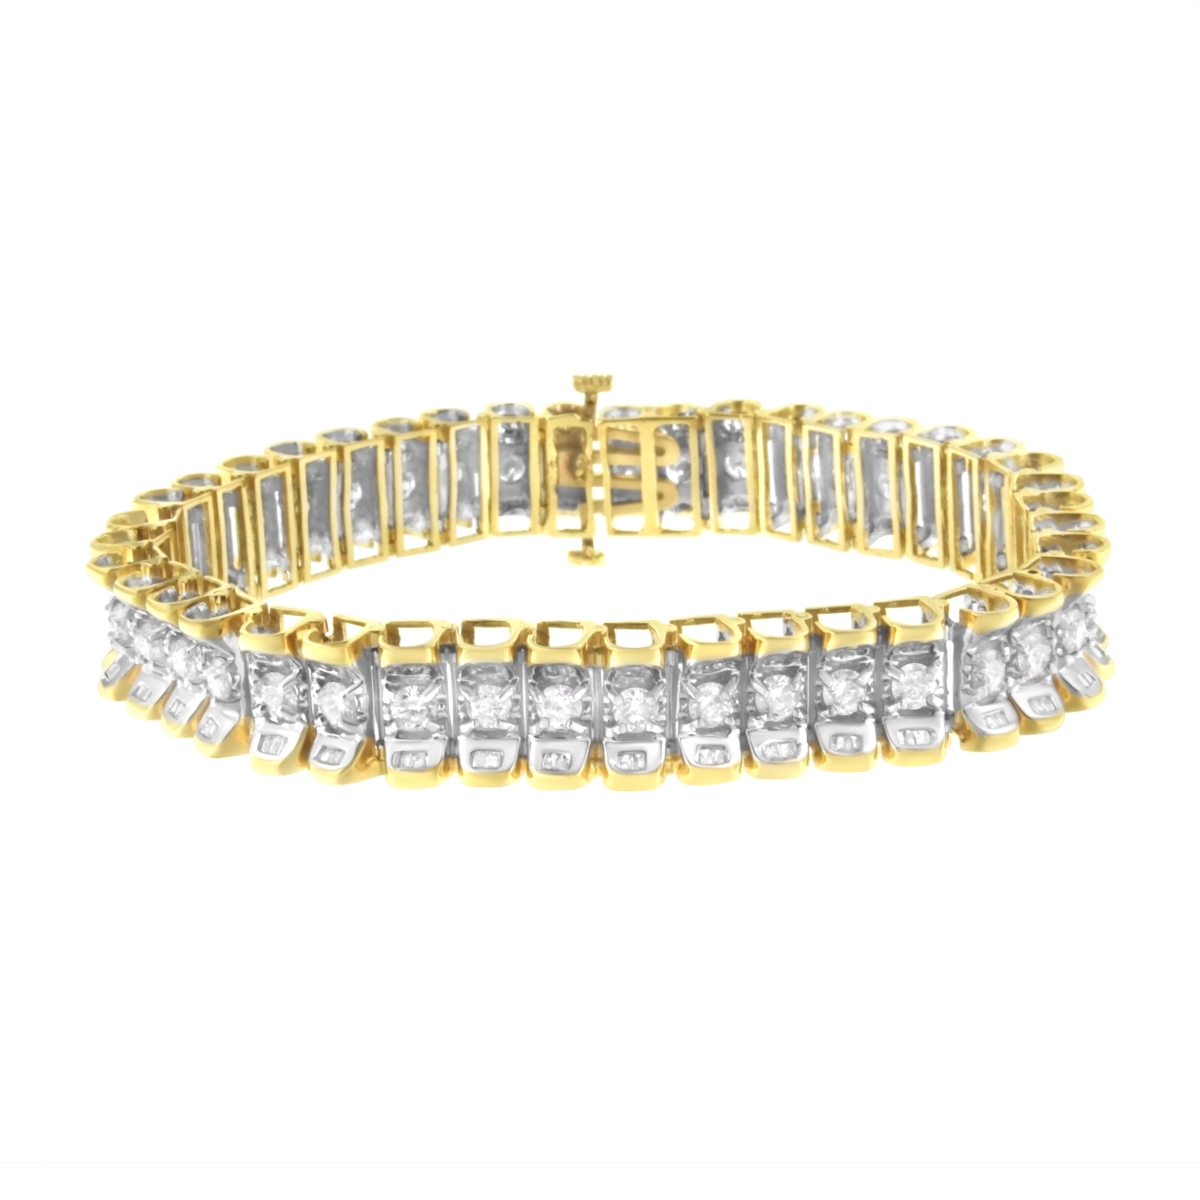 Picture of Infinite Jewels 017306B700 14K Yellow & White Gold 5.0 CTTW Round & Baguette Cut Diamond 7 in. Reflective Tennis Bracelet&#44; H-I Color - I1-I2 Clarity